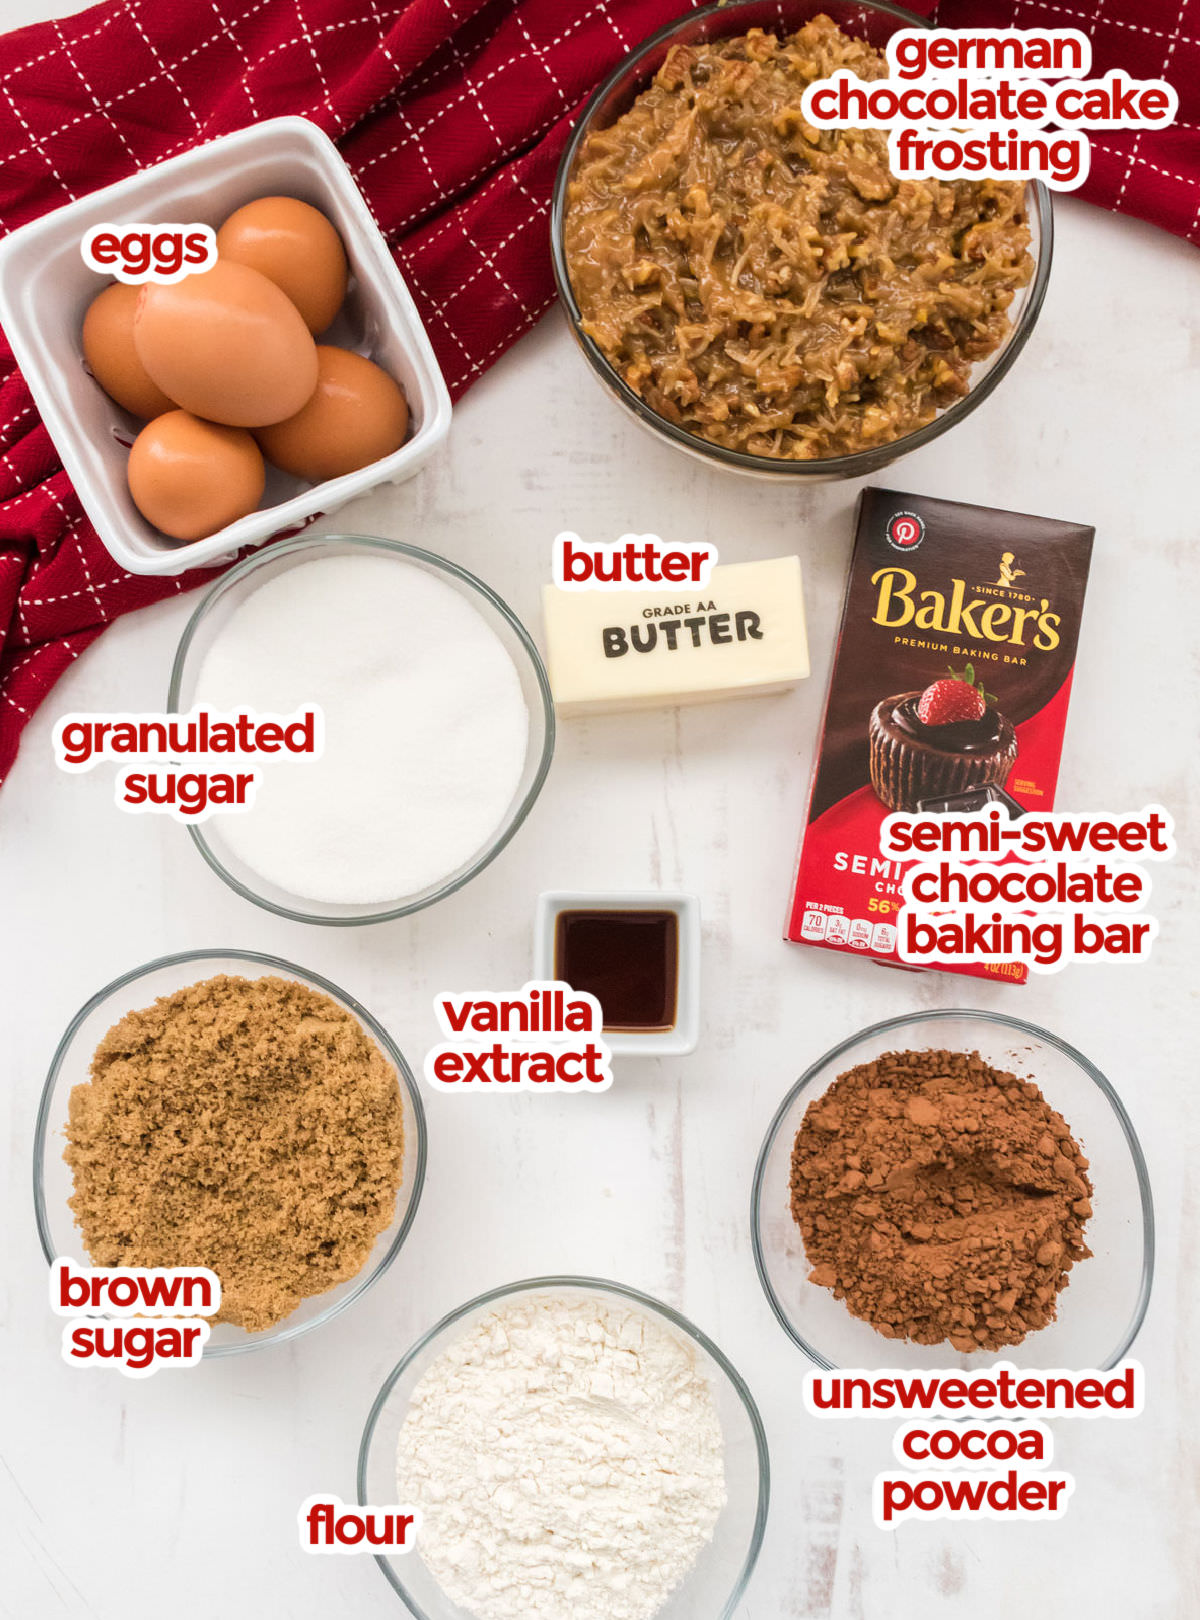 All the ingredients you will need to make the German Chocolate Brownies including Coconut Pecan Frosting, eggs, butter, semi-sweet chocolate baking bar, granulated sugar, brown sugar, vanilla, cocoa powder and flour.